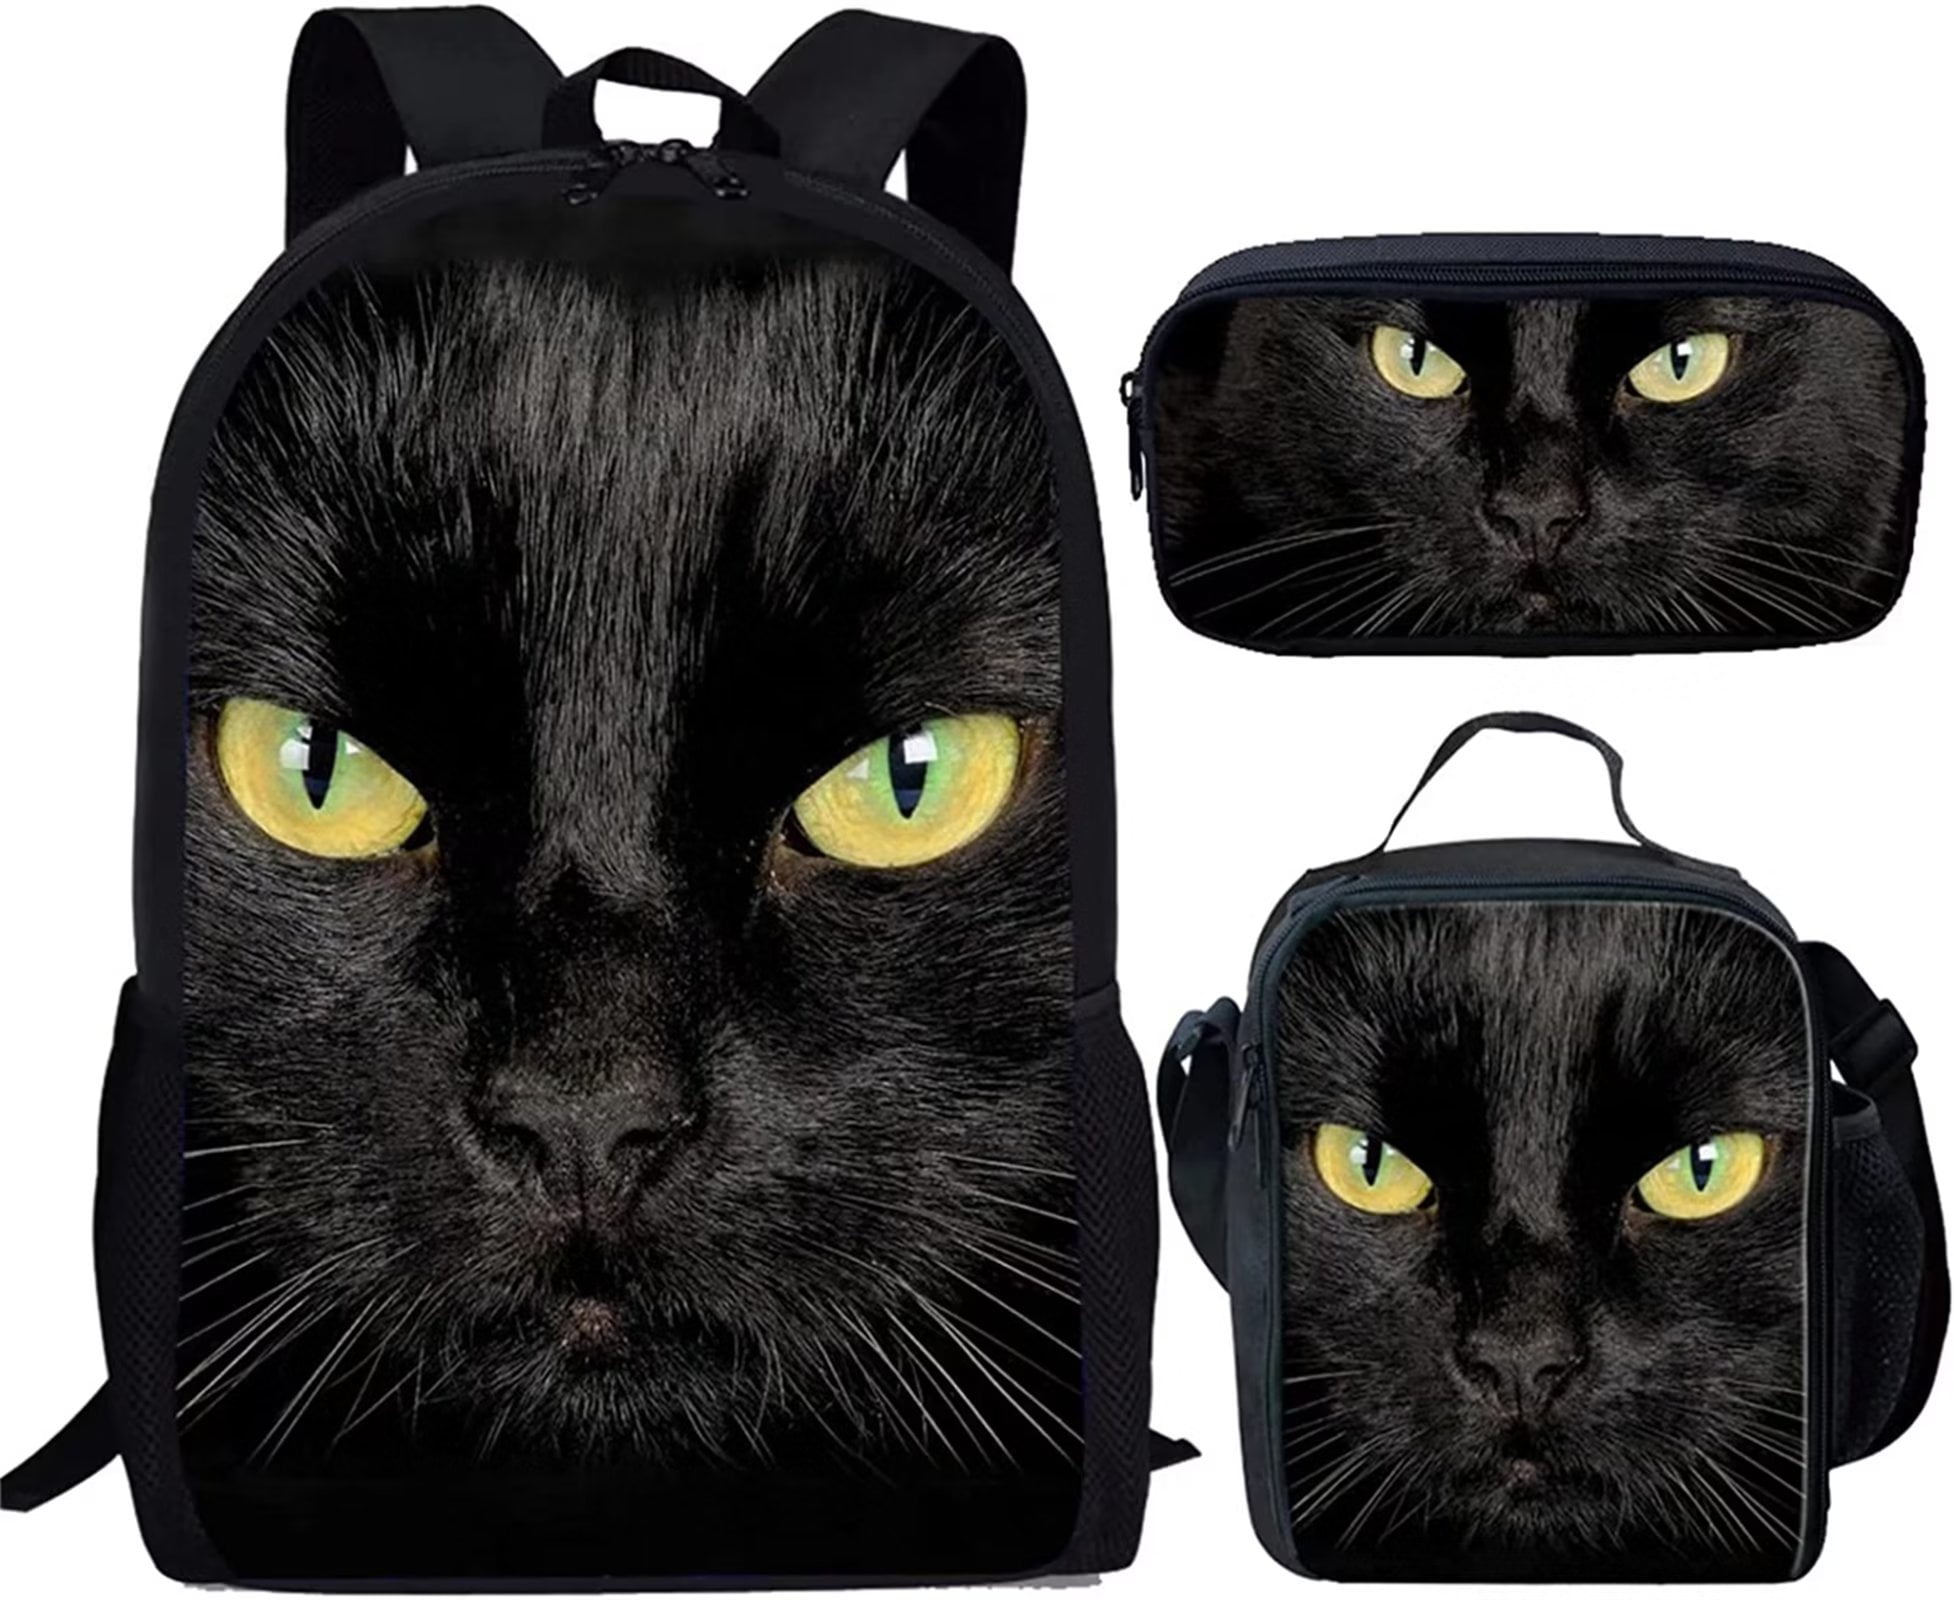 Renewold Black Cat School Backpack Purse for Girls Kids School Bag with  Lunch Box Pencil Case Elementary Primary High Schoolbags Bookbag Large